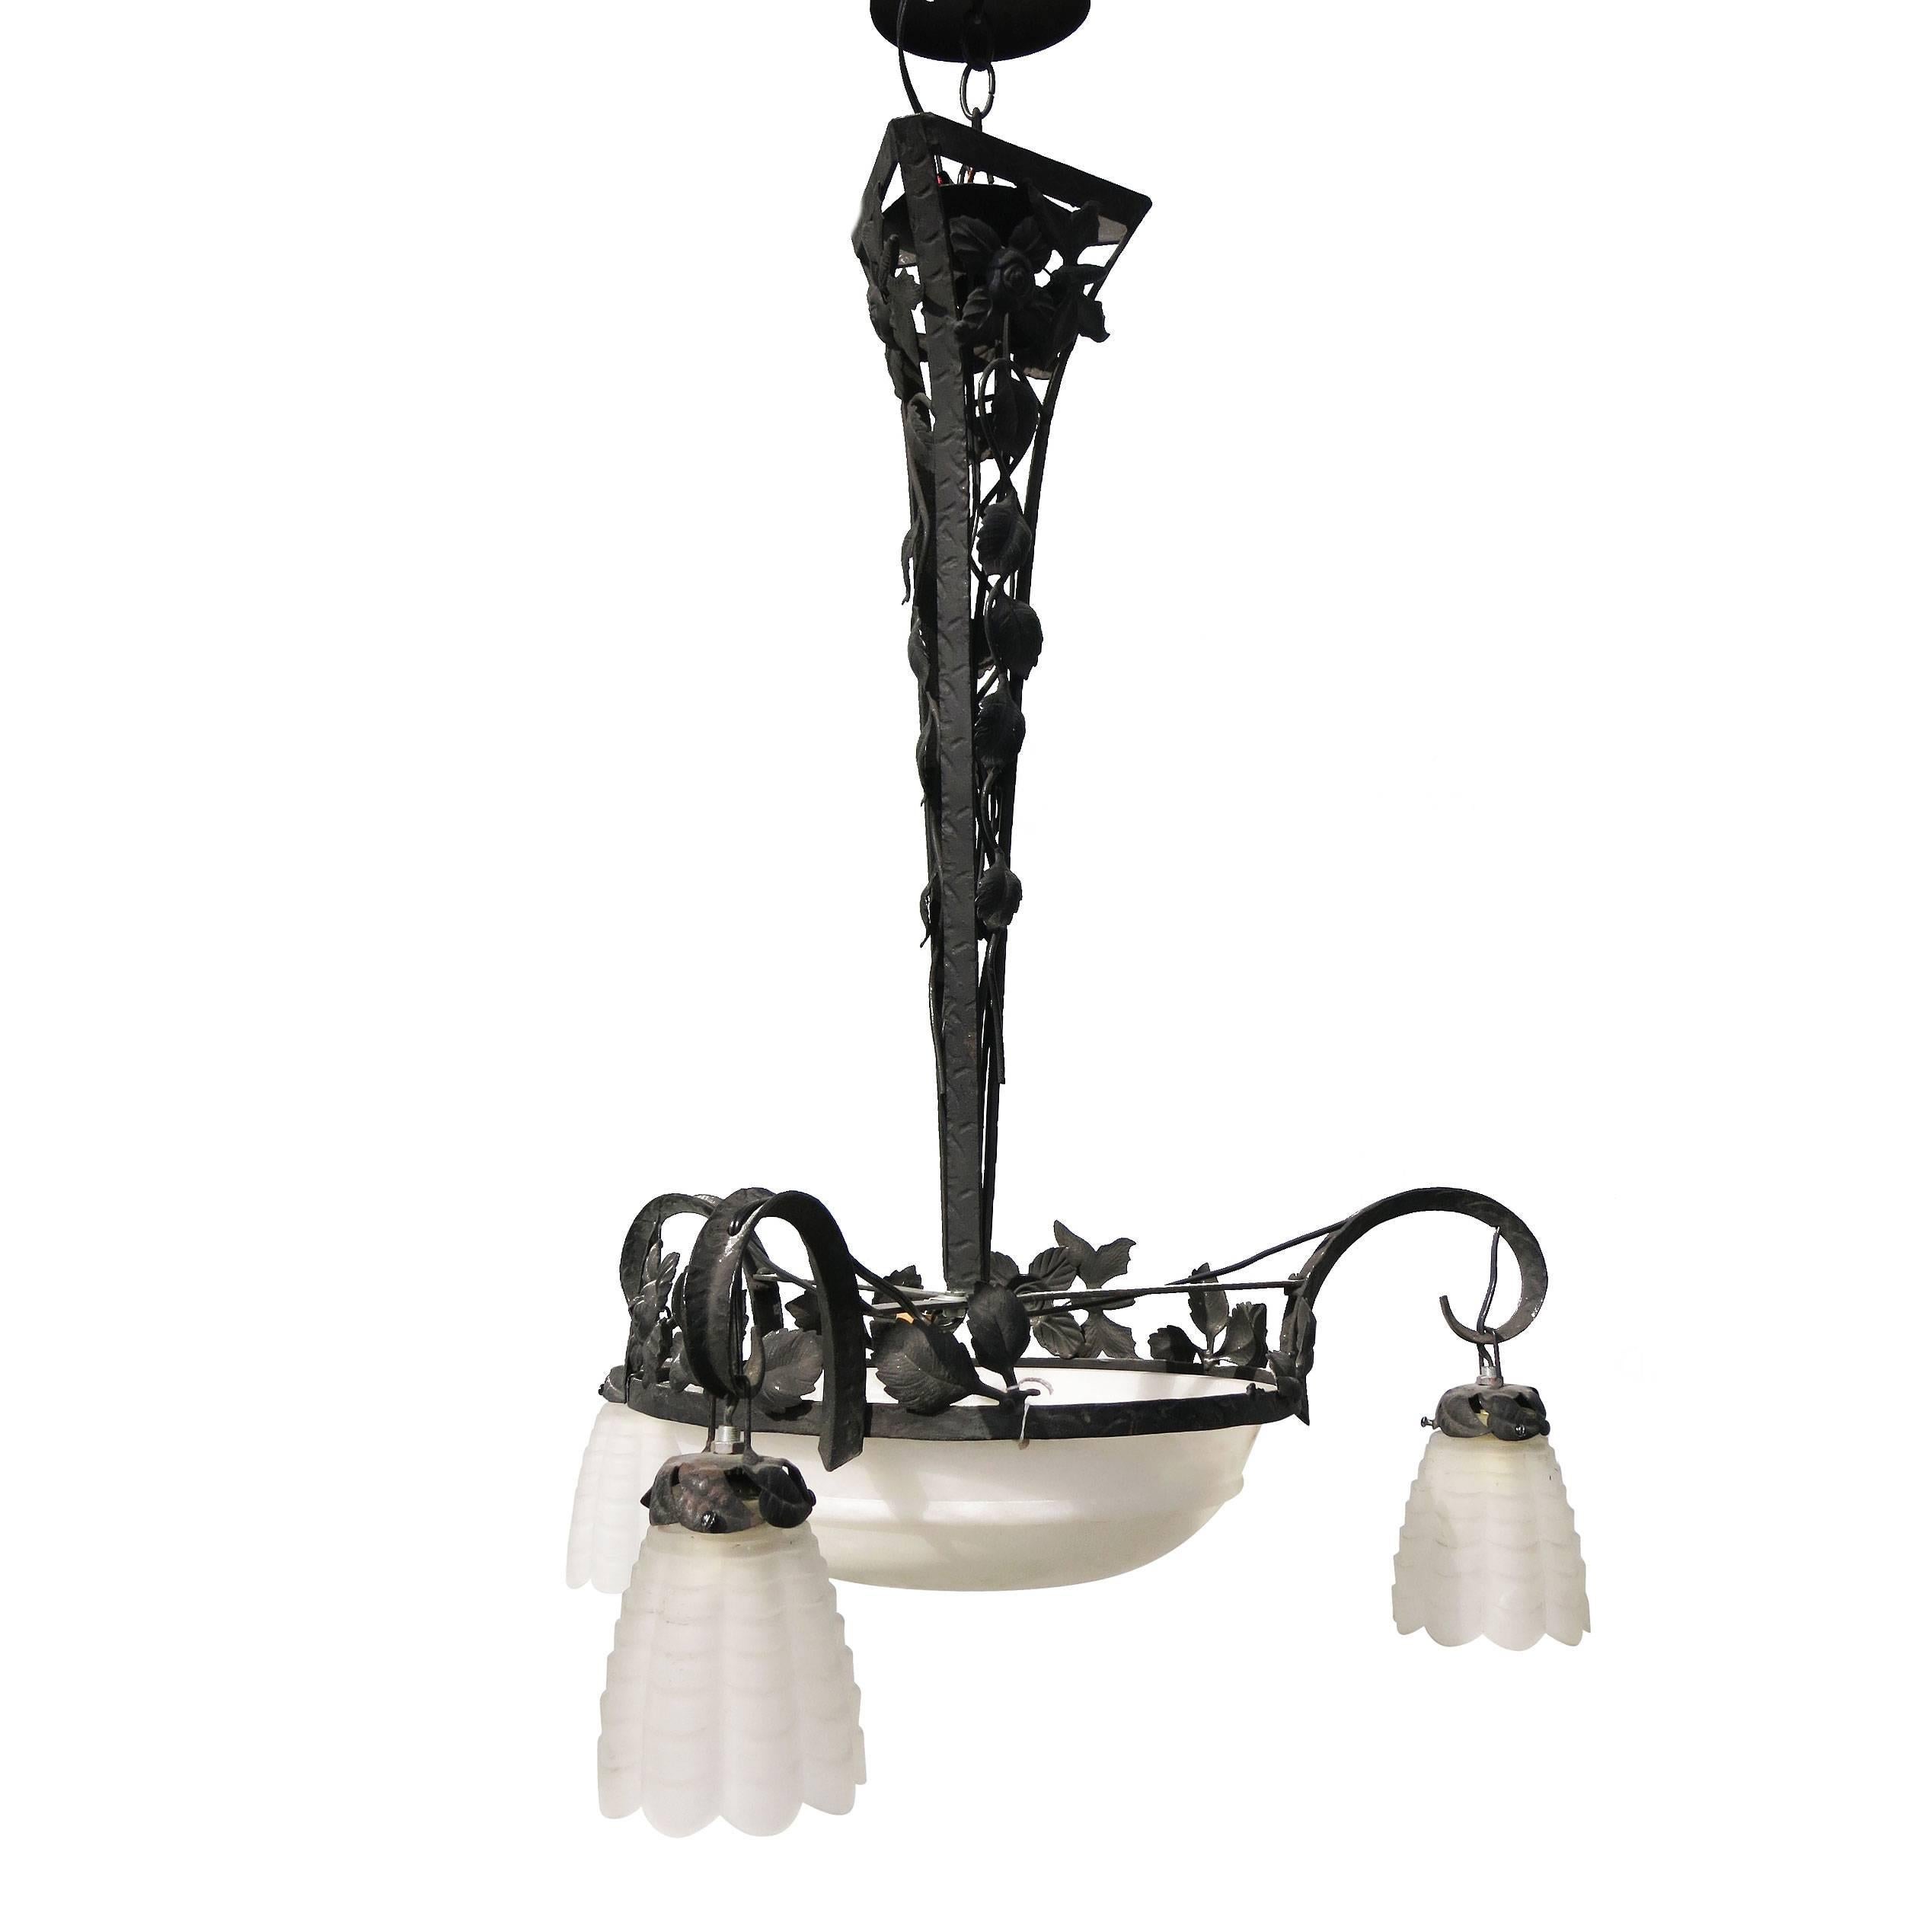 Hand forged tole French style alabaster and iron chandelier with hand forged black iron chandelier and hand carved alabaster shades. The chandelier features a large light up dome shade in the center and three hand carved alabaster shades.

Sold